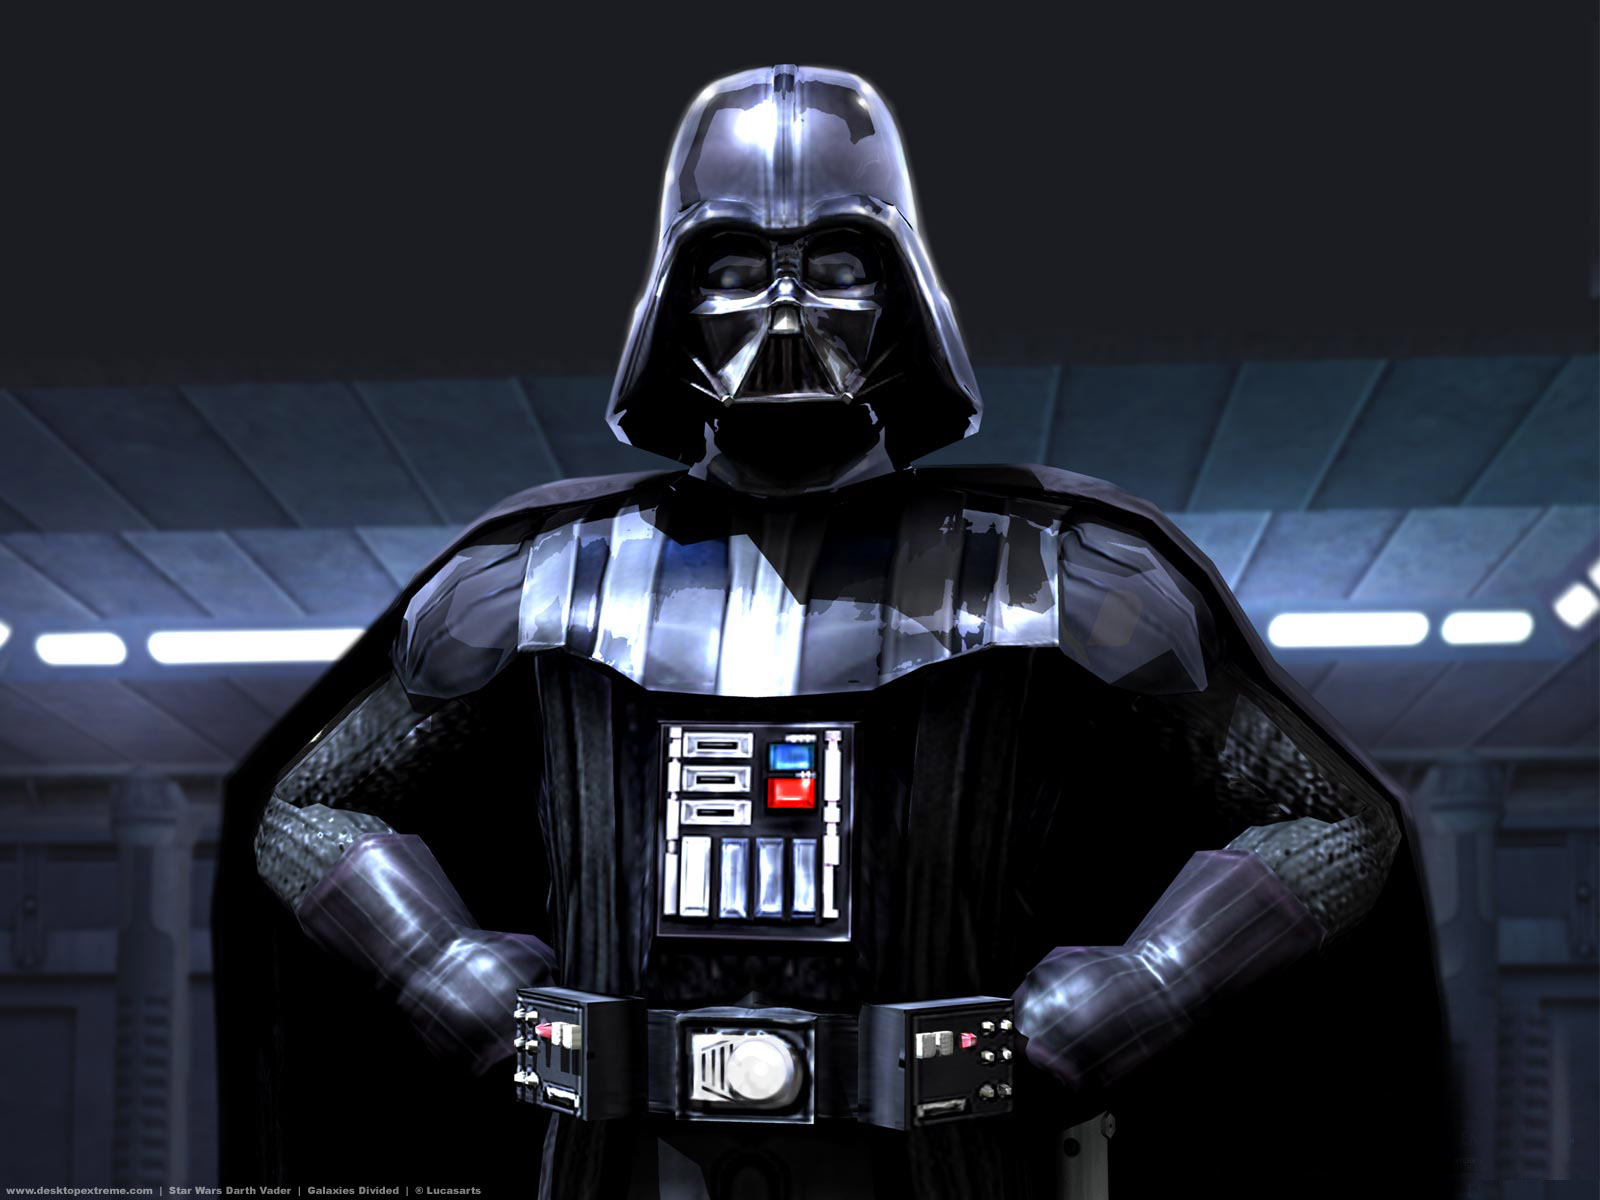 Geek insider, geekinsider, geekinsider. Com,, darth vader and the challenges of being a parent, comics